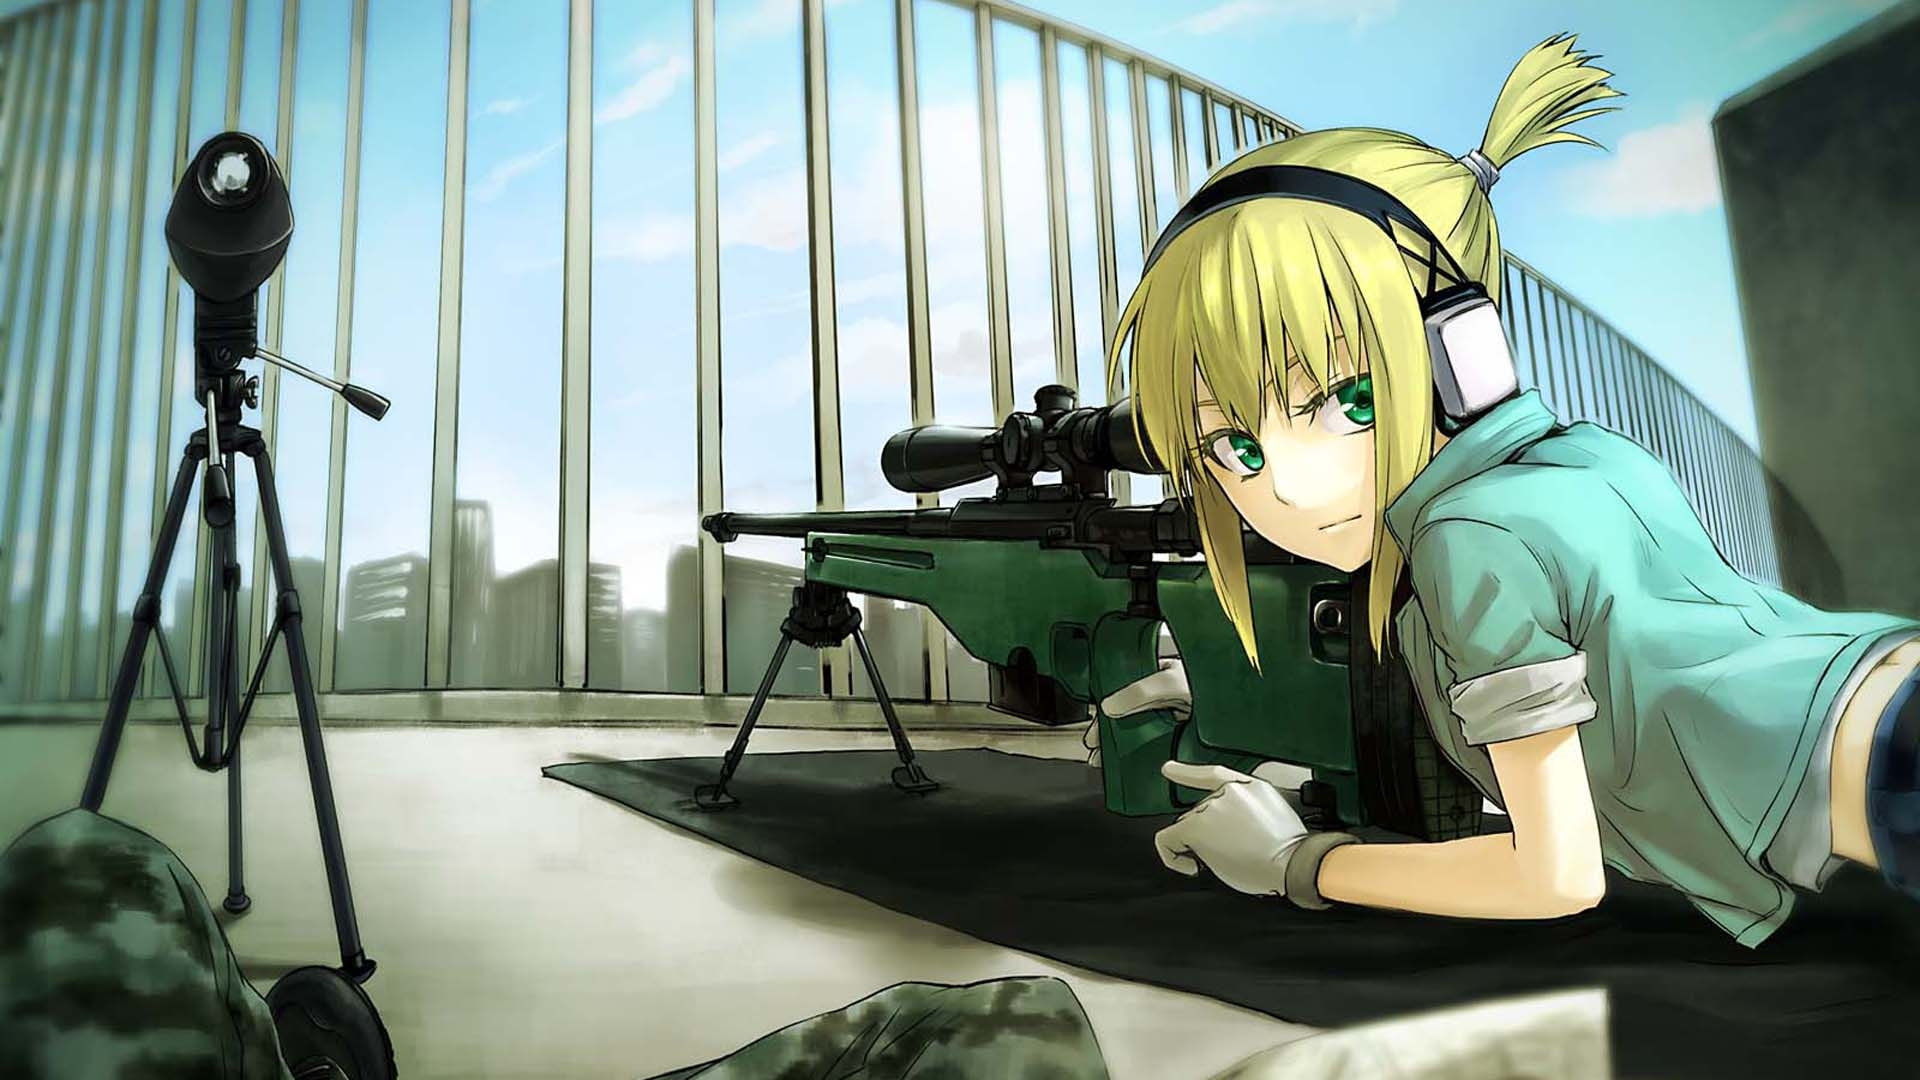 blondes snipers sniper rifles green eyes anime girls games l96 material sniper 1920x1080 wallpape Anime Hot Anime HD Art